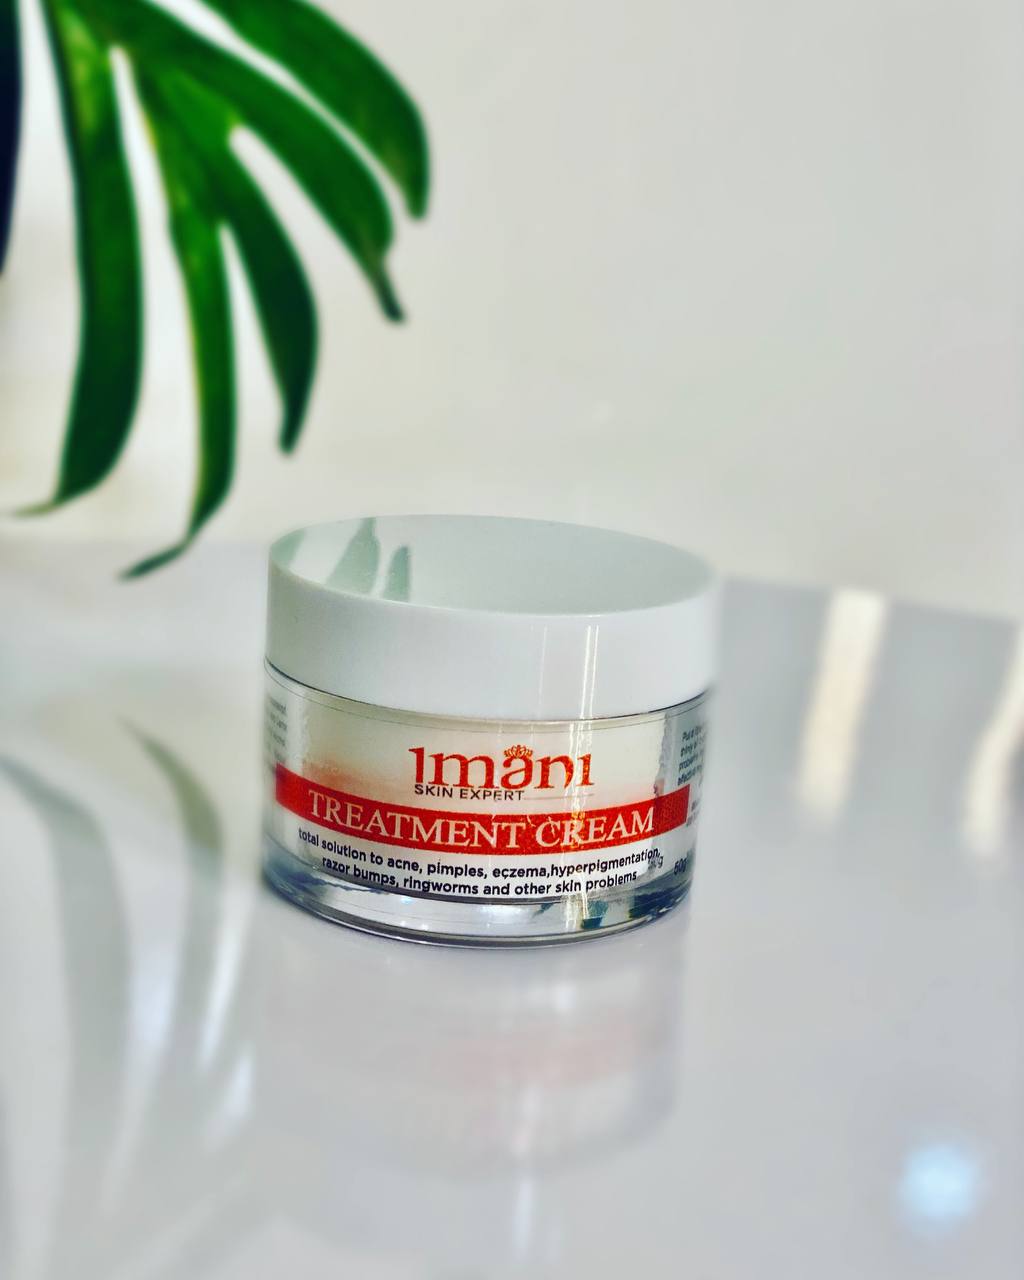 Buy Treatment Face Cream Online. Enjoy safe shopping online with our ecommerce. ✓ Best Price in Nigeria ✓ Fast Delivery & Express delivery Available. Also available at the Lagos and Abuja offices of Imani Aesthetic and Laser Clinic